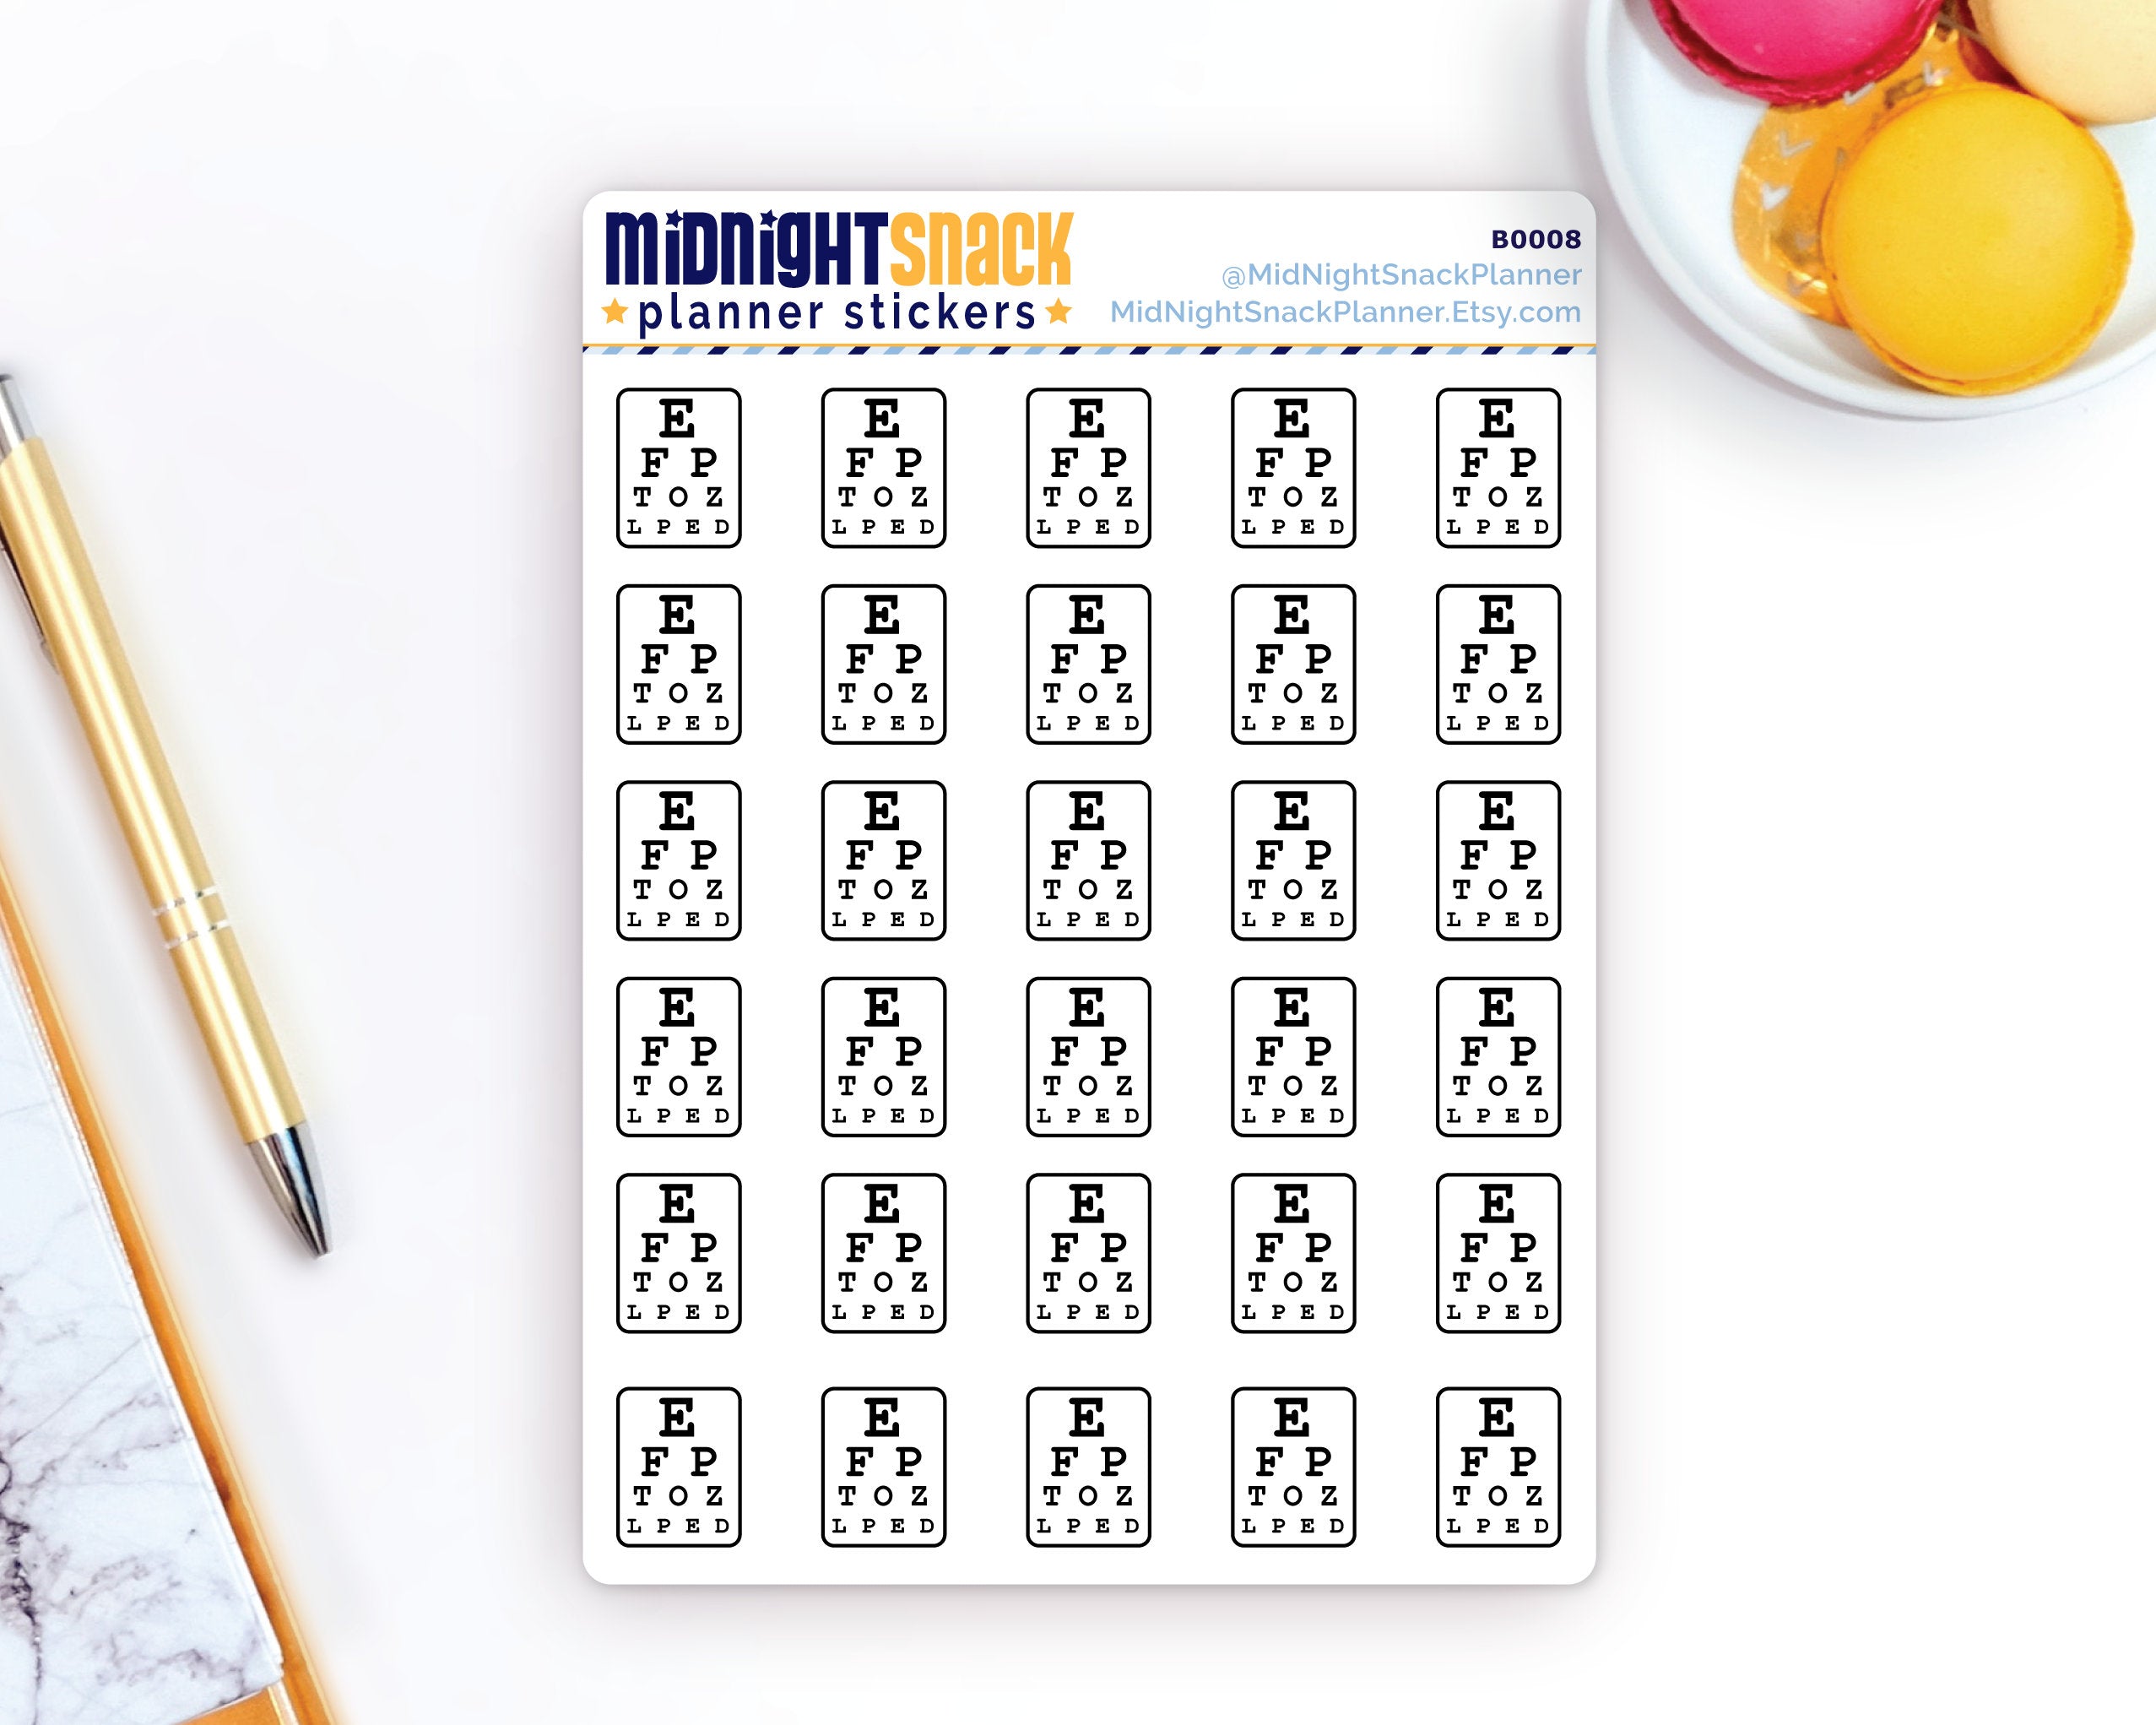 Optometrist Reminder Icon: Appointment Planner Stickers Midnight Snack Planner